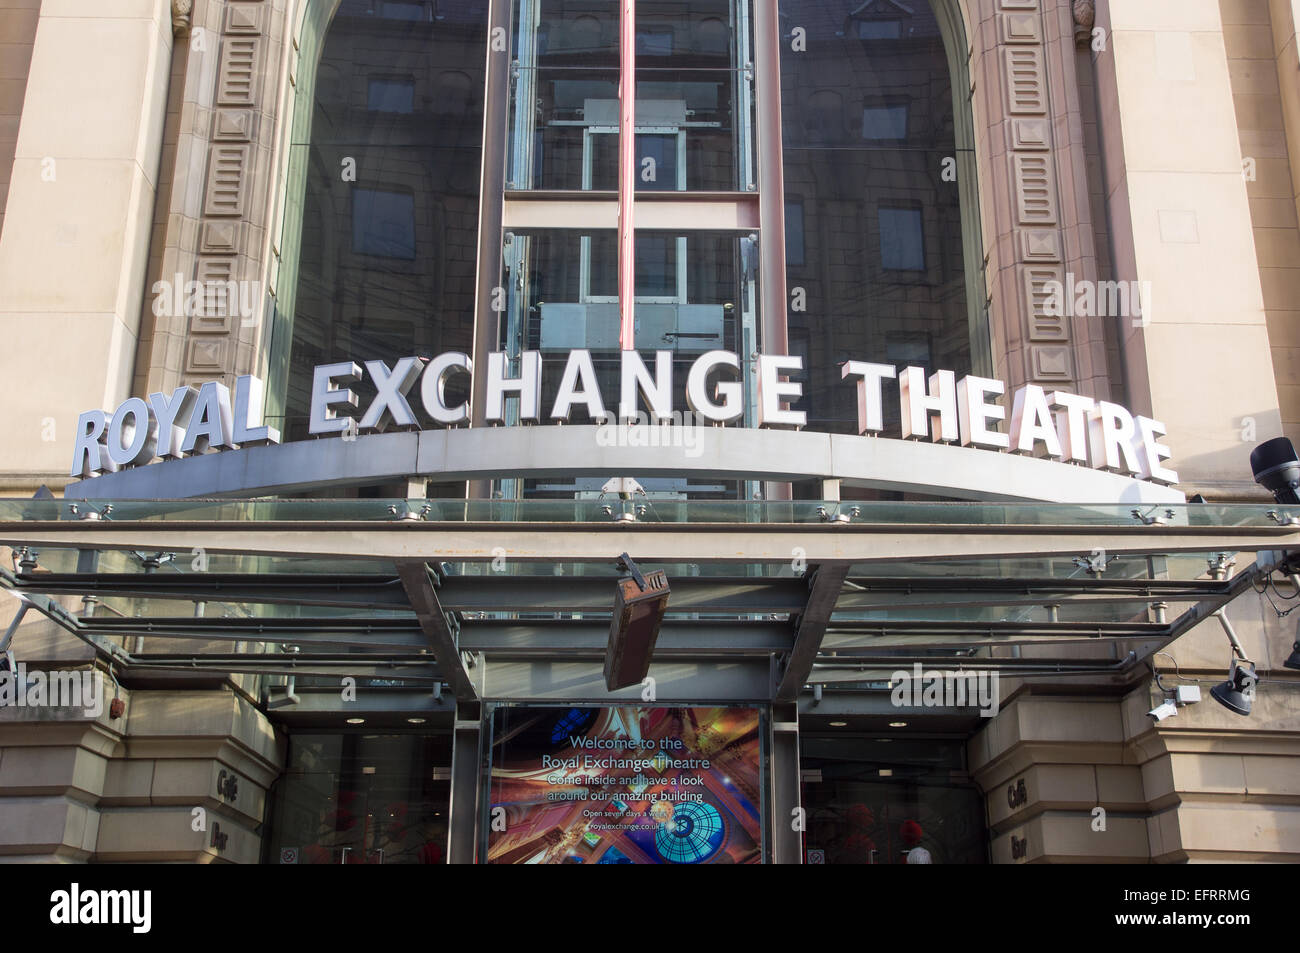 Entrance royal exchange theatre on st annes square manchester uk Stock Photo